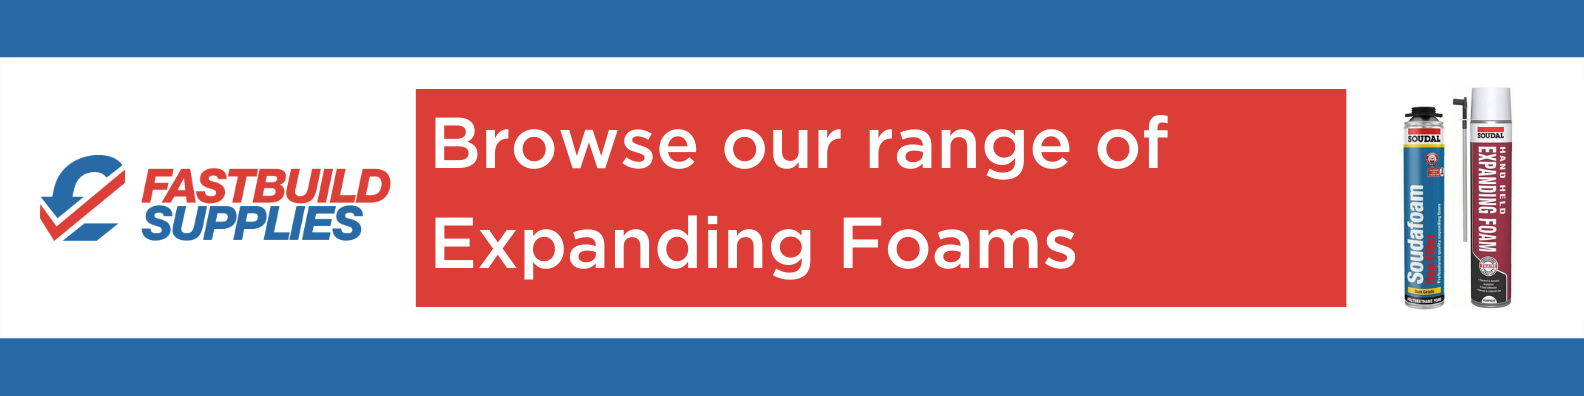 browse our range of expanding foams 